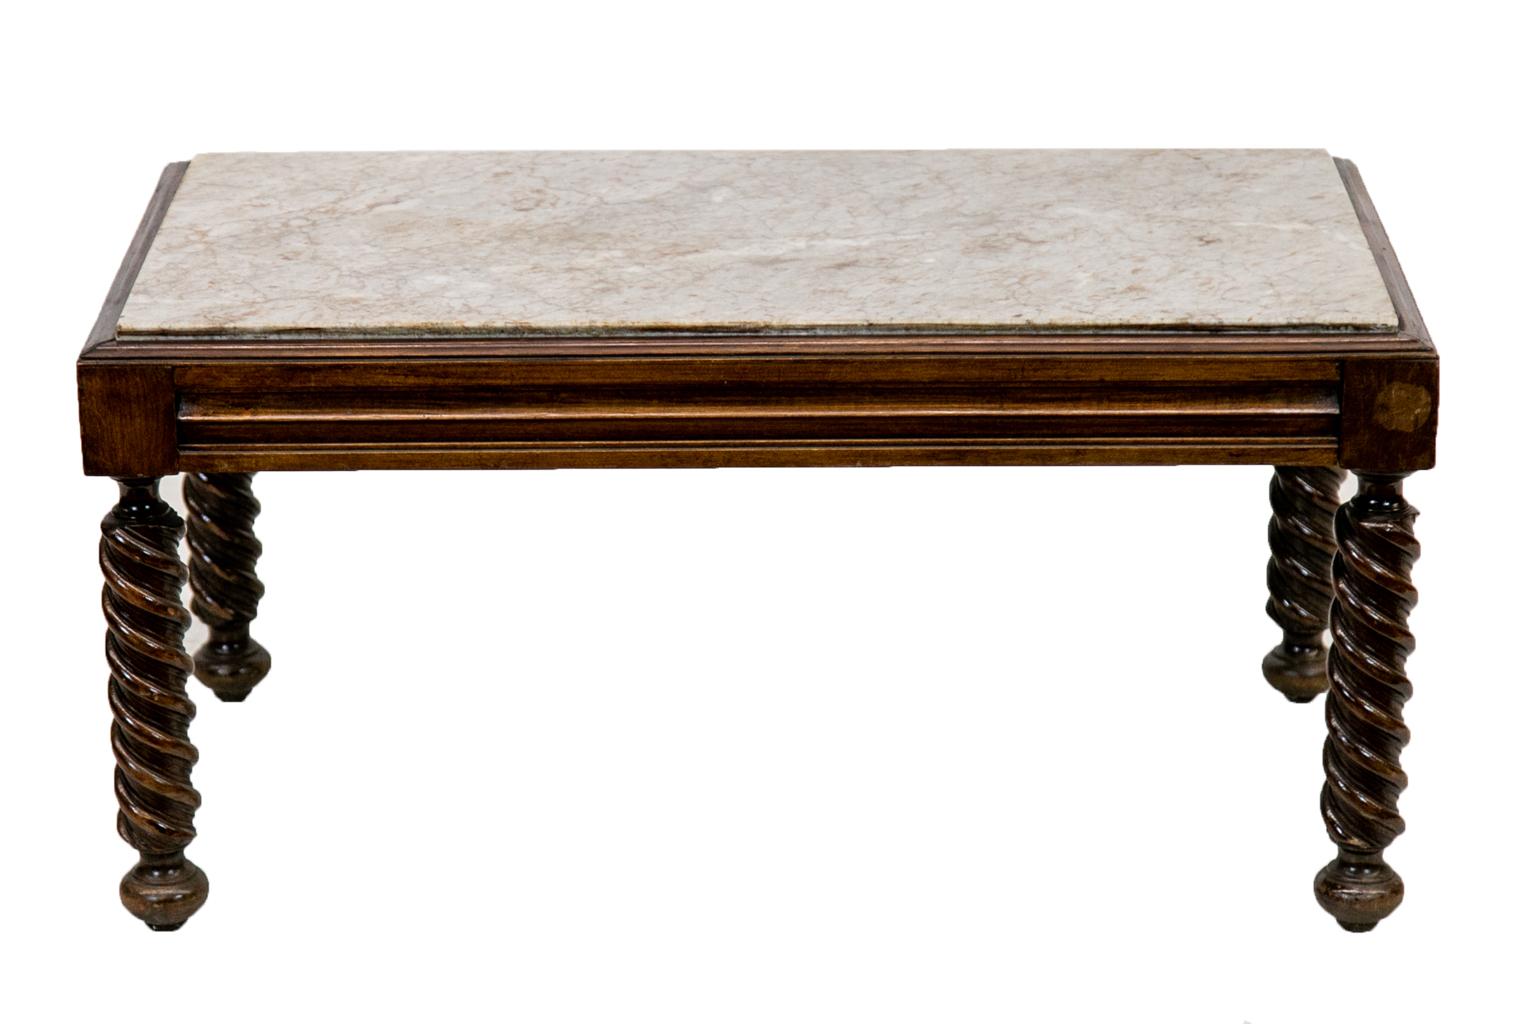 The top of this coffee table has shaped applied molding. There are shaped molded panels in the apron on all four sides. The marble is not attached but sits securely in the frame.